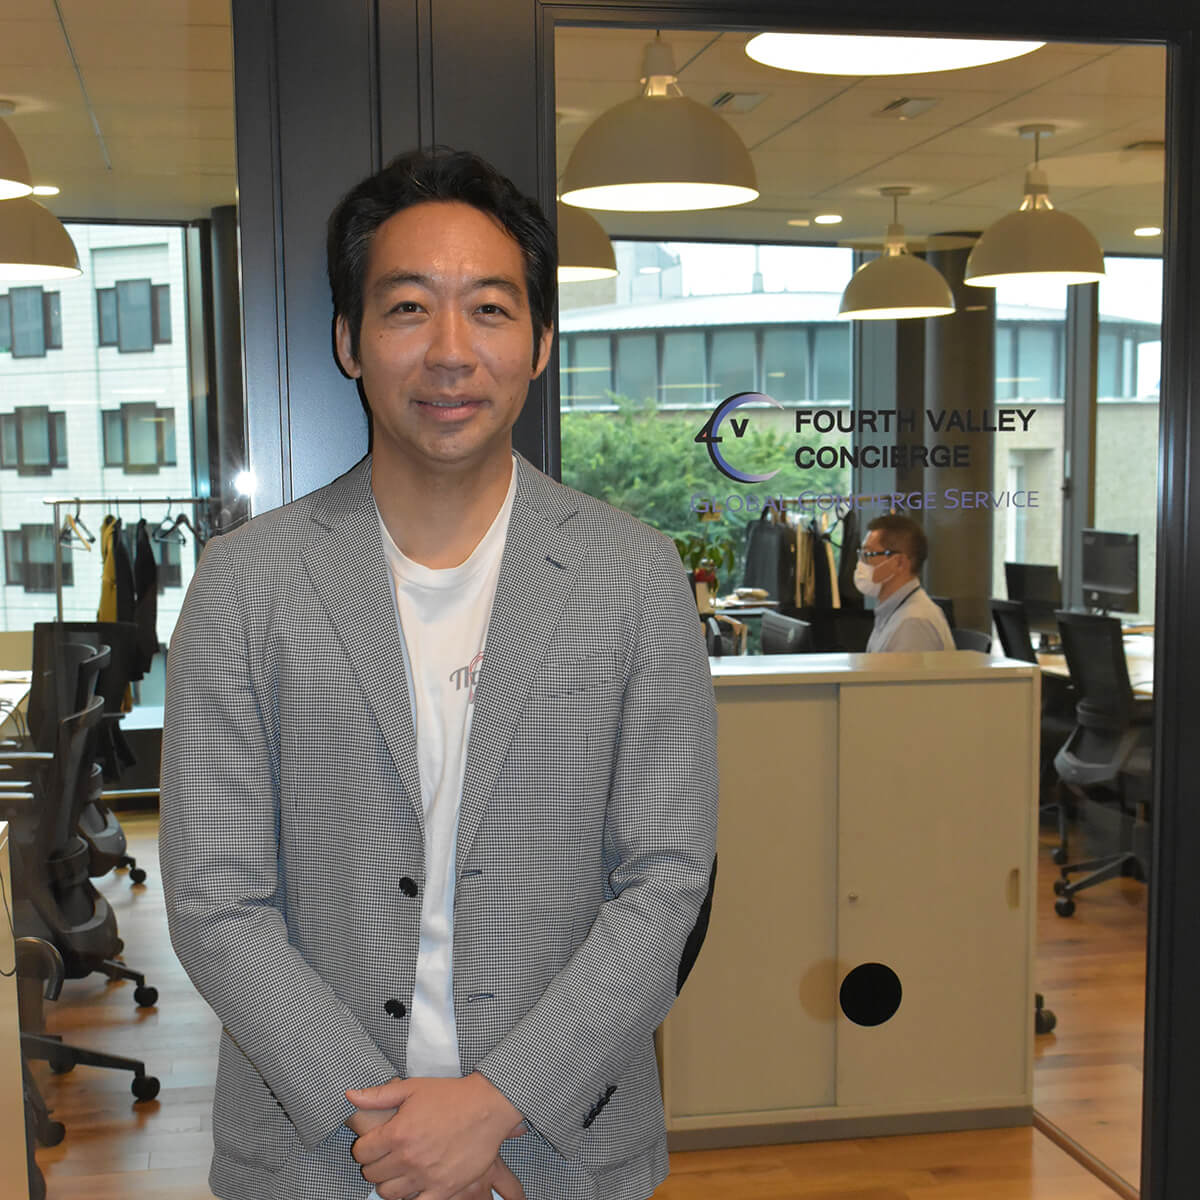 Fourth Valley CEO Yohei Shibasaki poses in front of his company's office